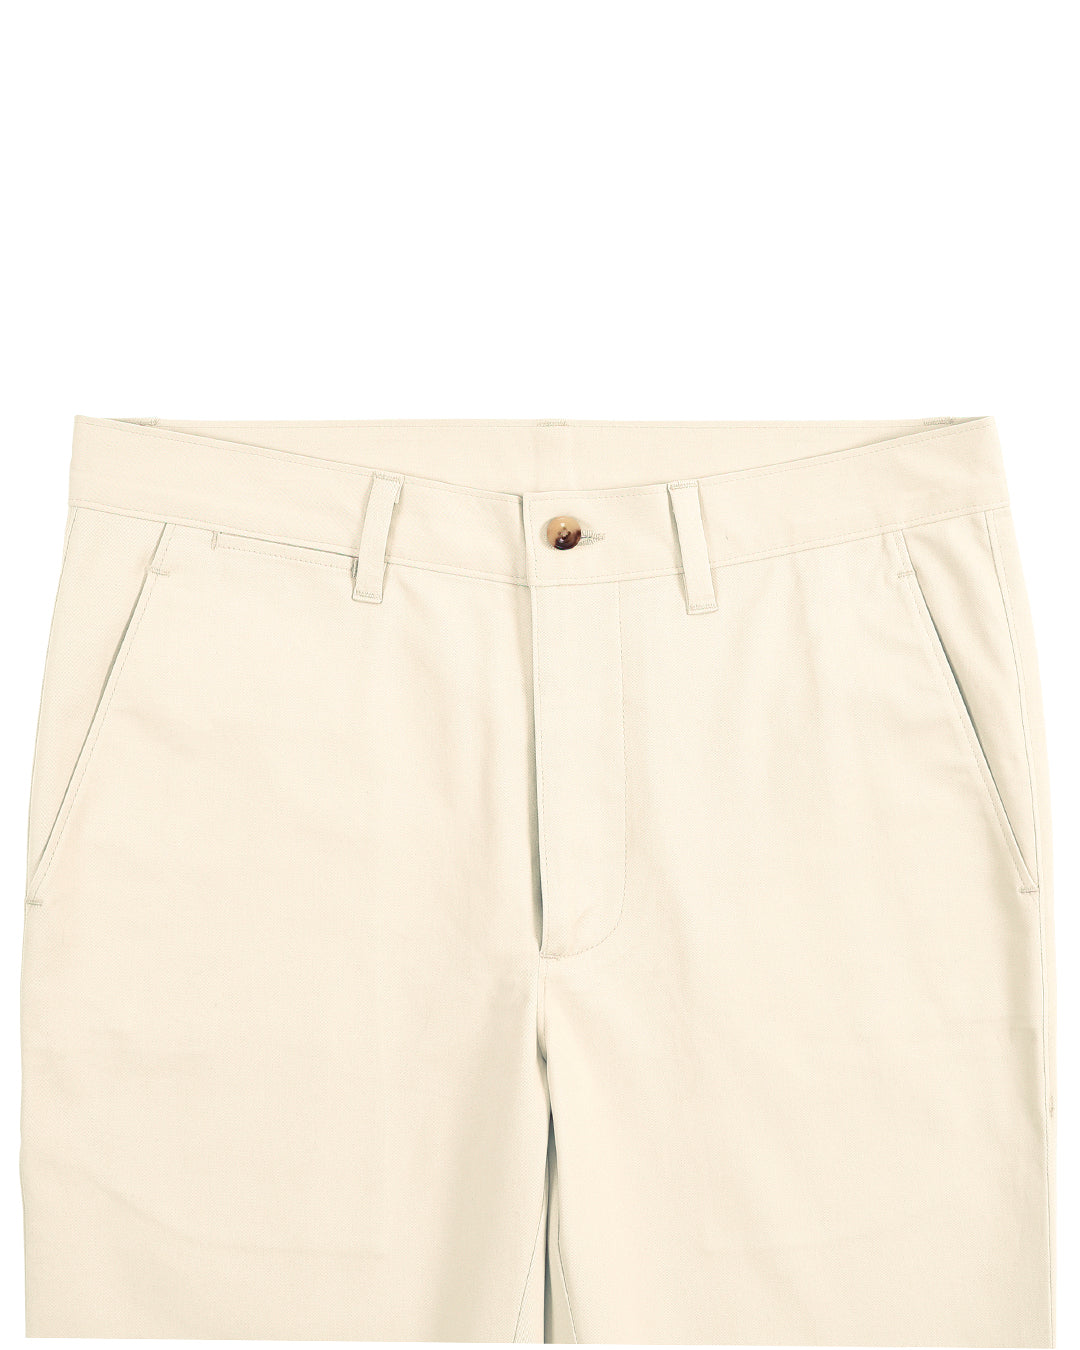 Front view of custom Genoa Chino pants for men by Luxire in ivory cream